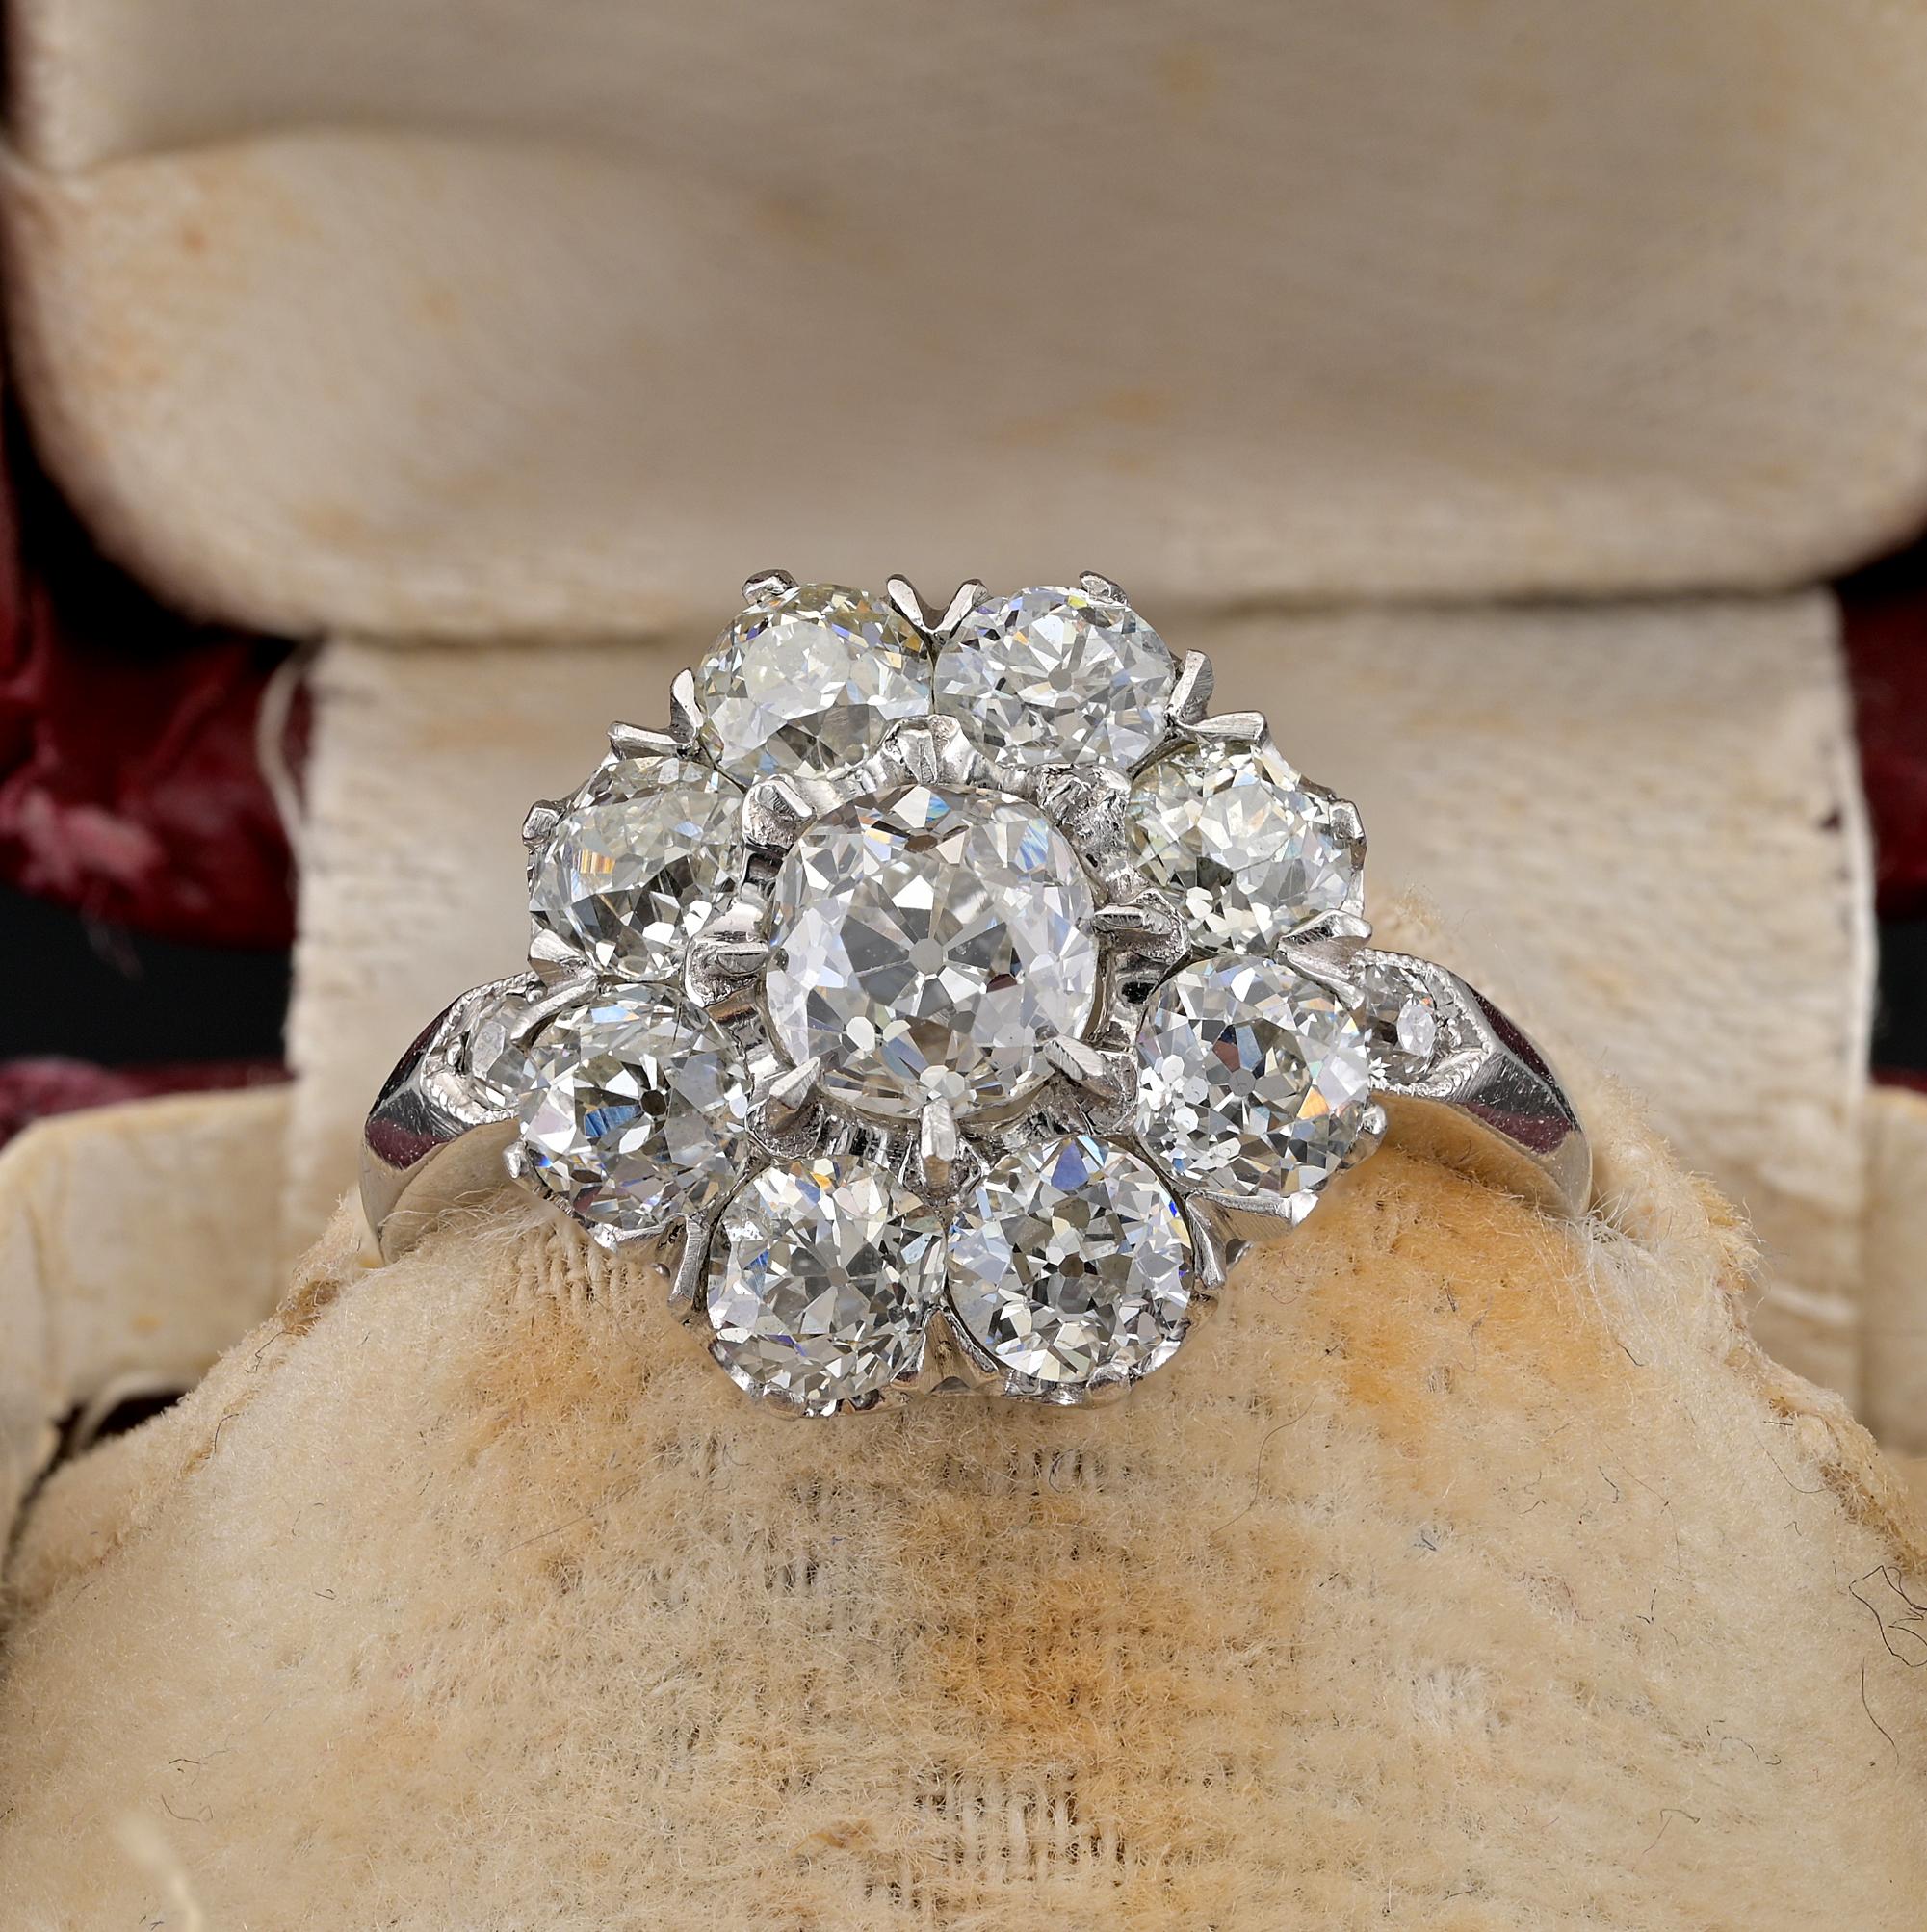 This ia a breathtaking Edwardian ring 
Hand crafted of solid Platinum in a superb Daisy design over cared into the slightest detail
A selection of old mine cut Diamonds is disposed on the setting as a flower, with larger Diamond in the middle and 